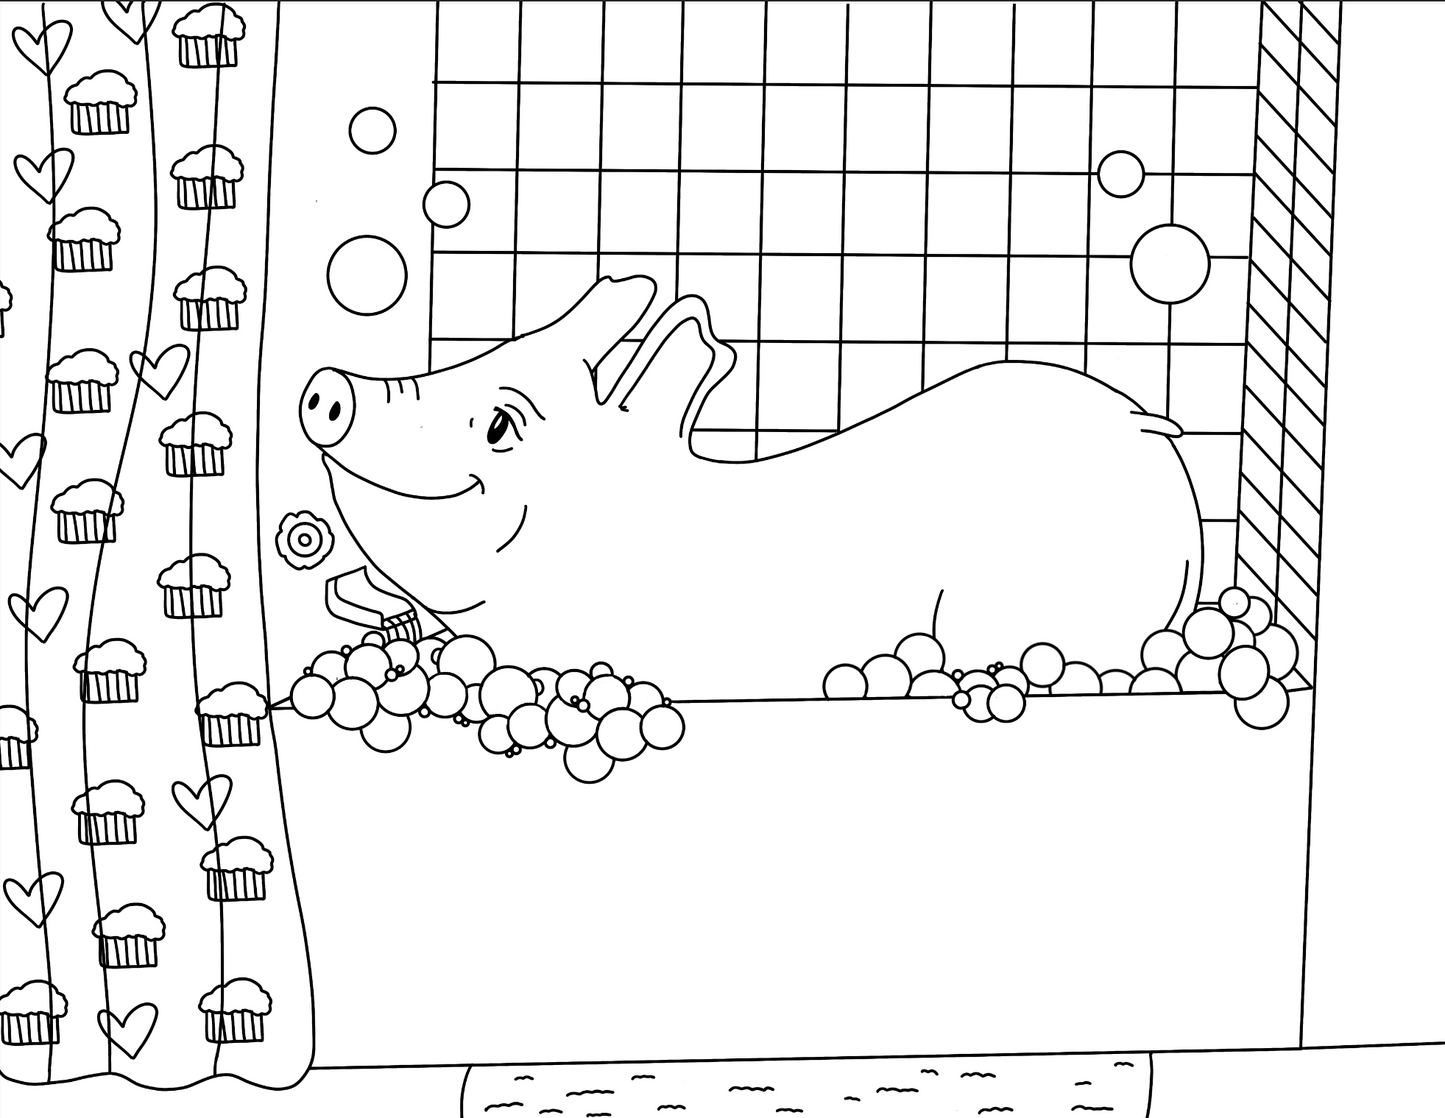 NEW- Esther The Wonder Pig- Colouring book/ With Rainbow Ornament